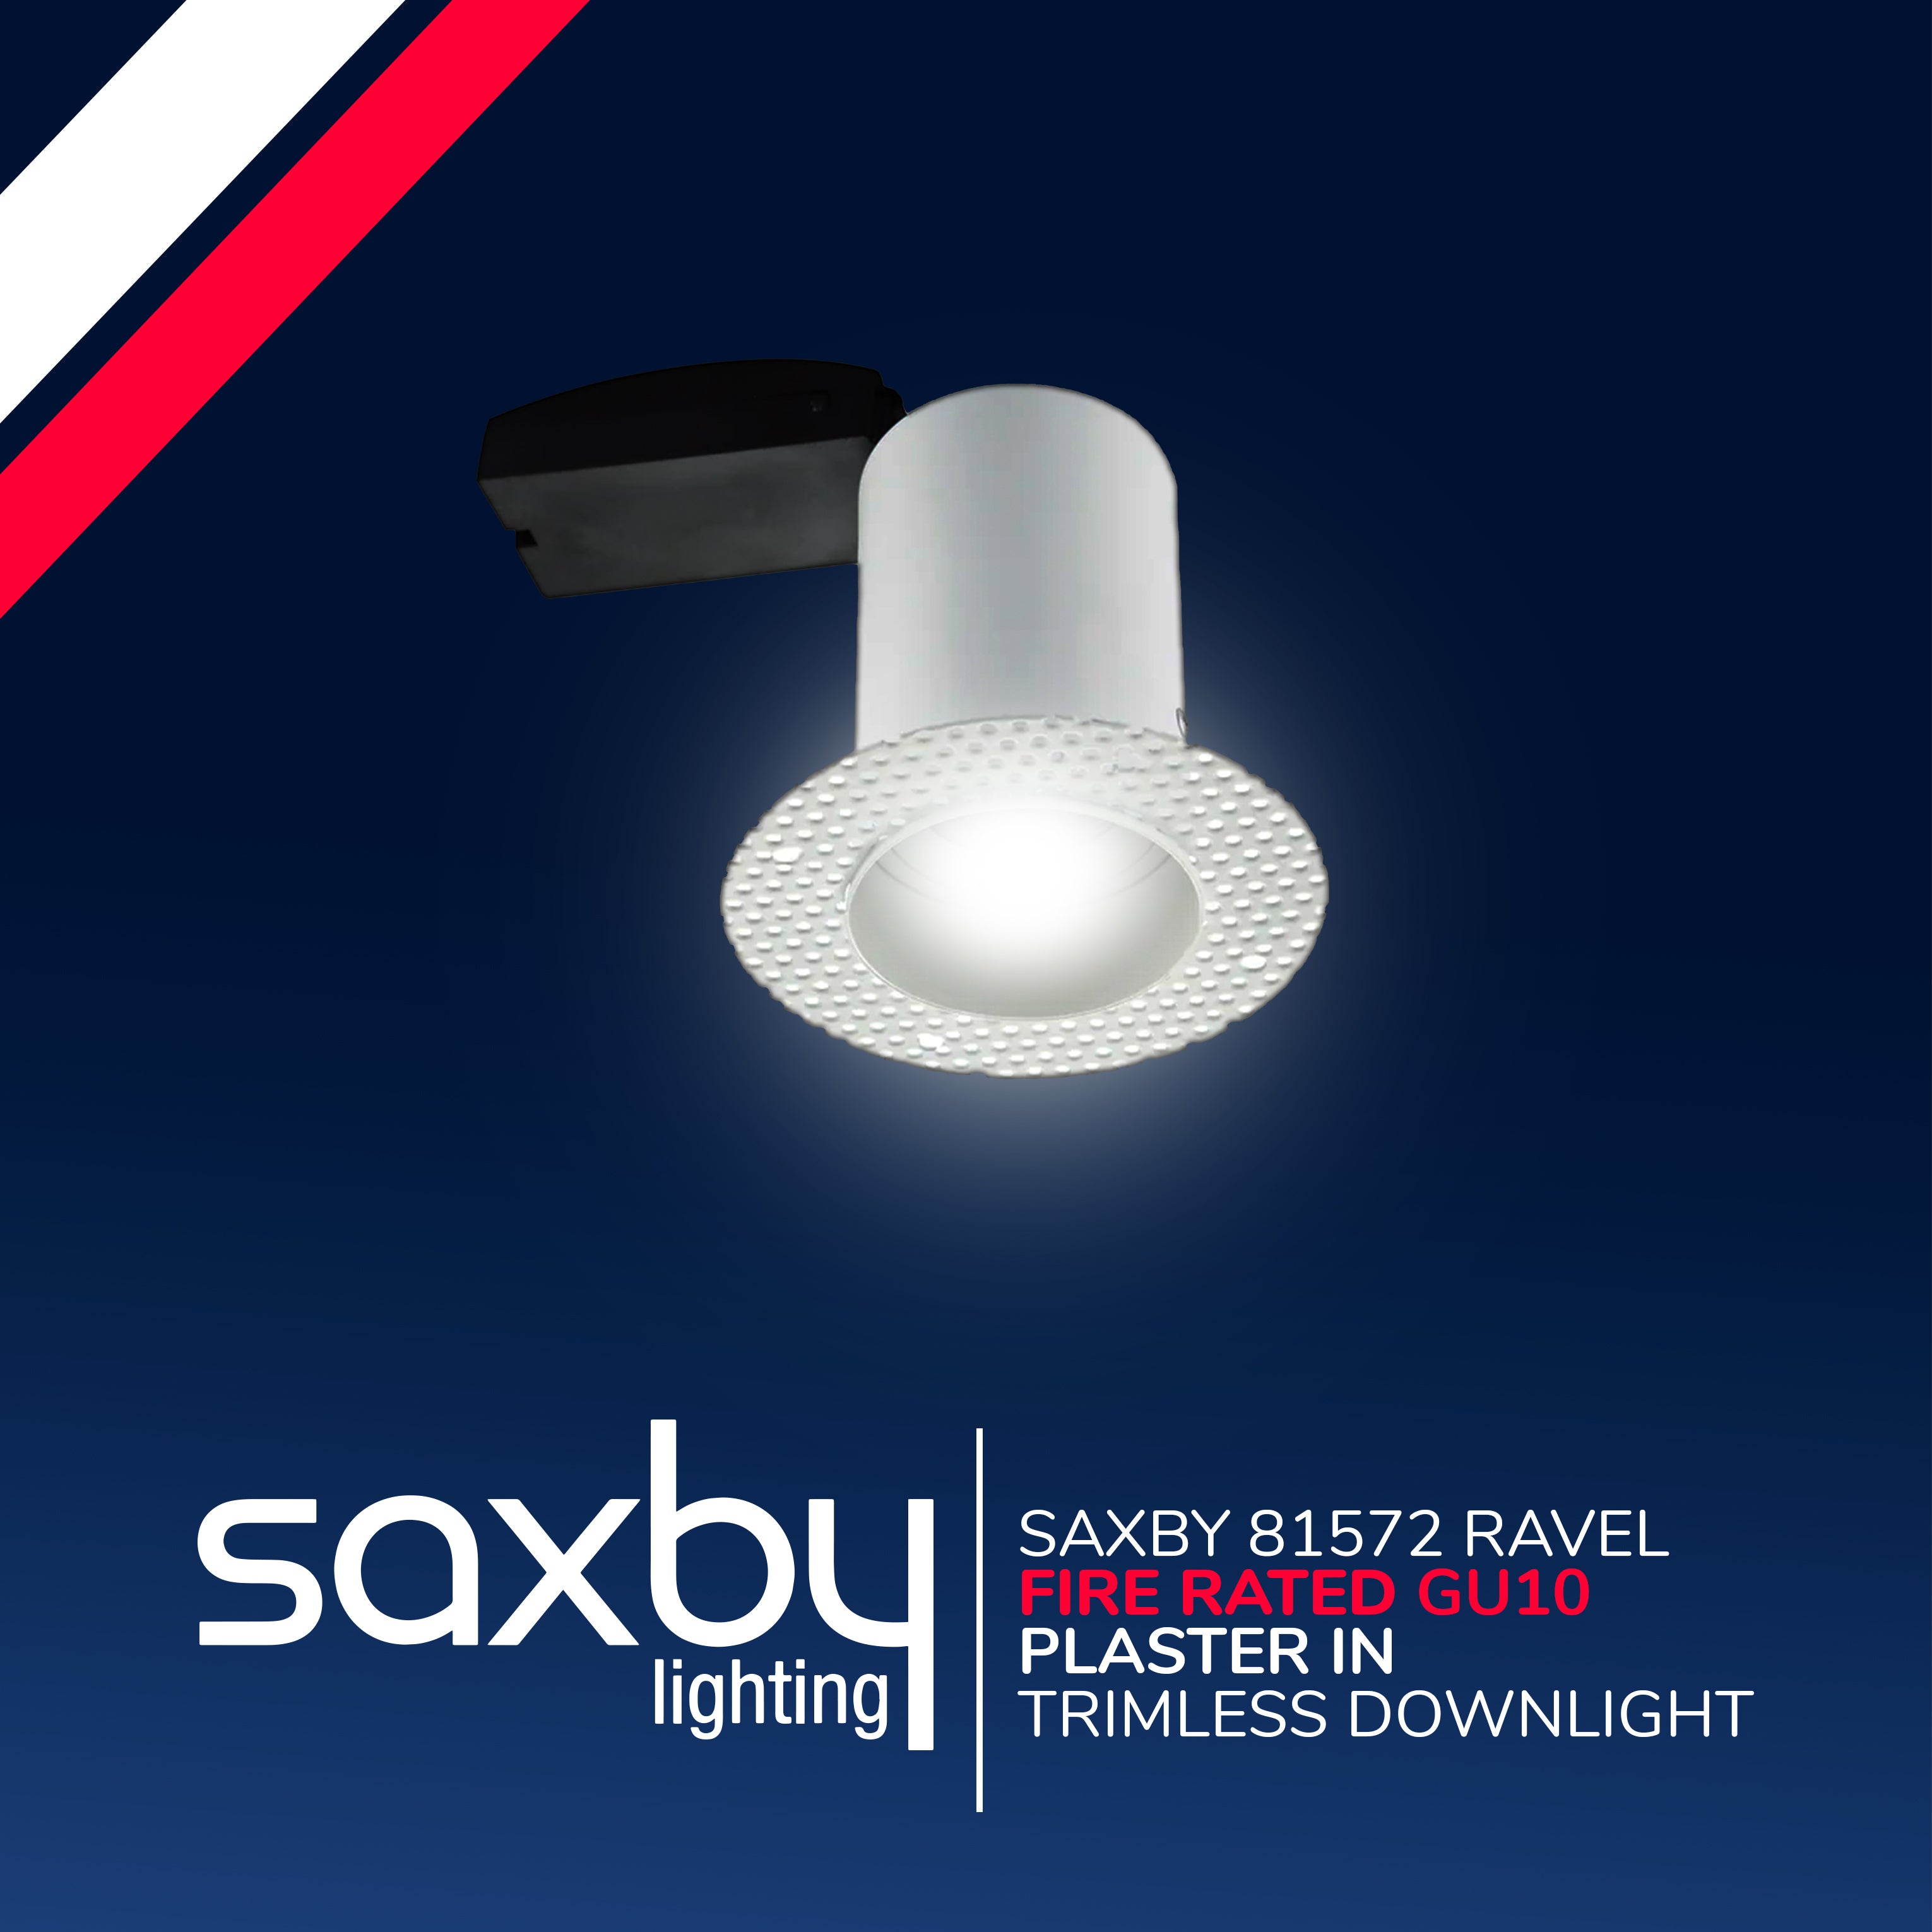 Saxby 81572 Ravel Trimless Plaster-in Fire Rated GU10 Downlight